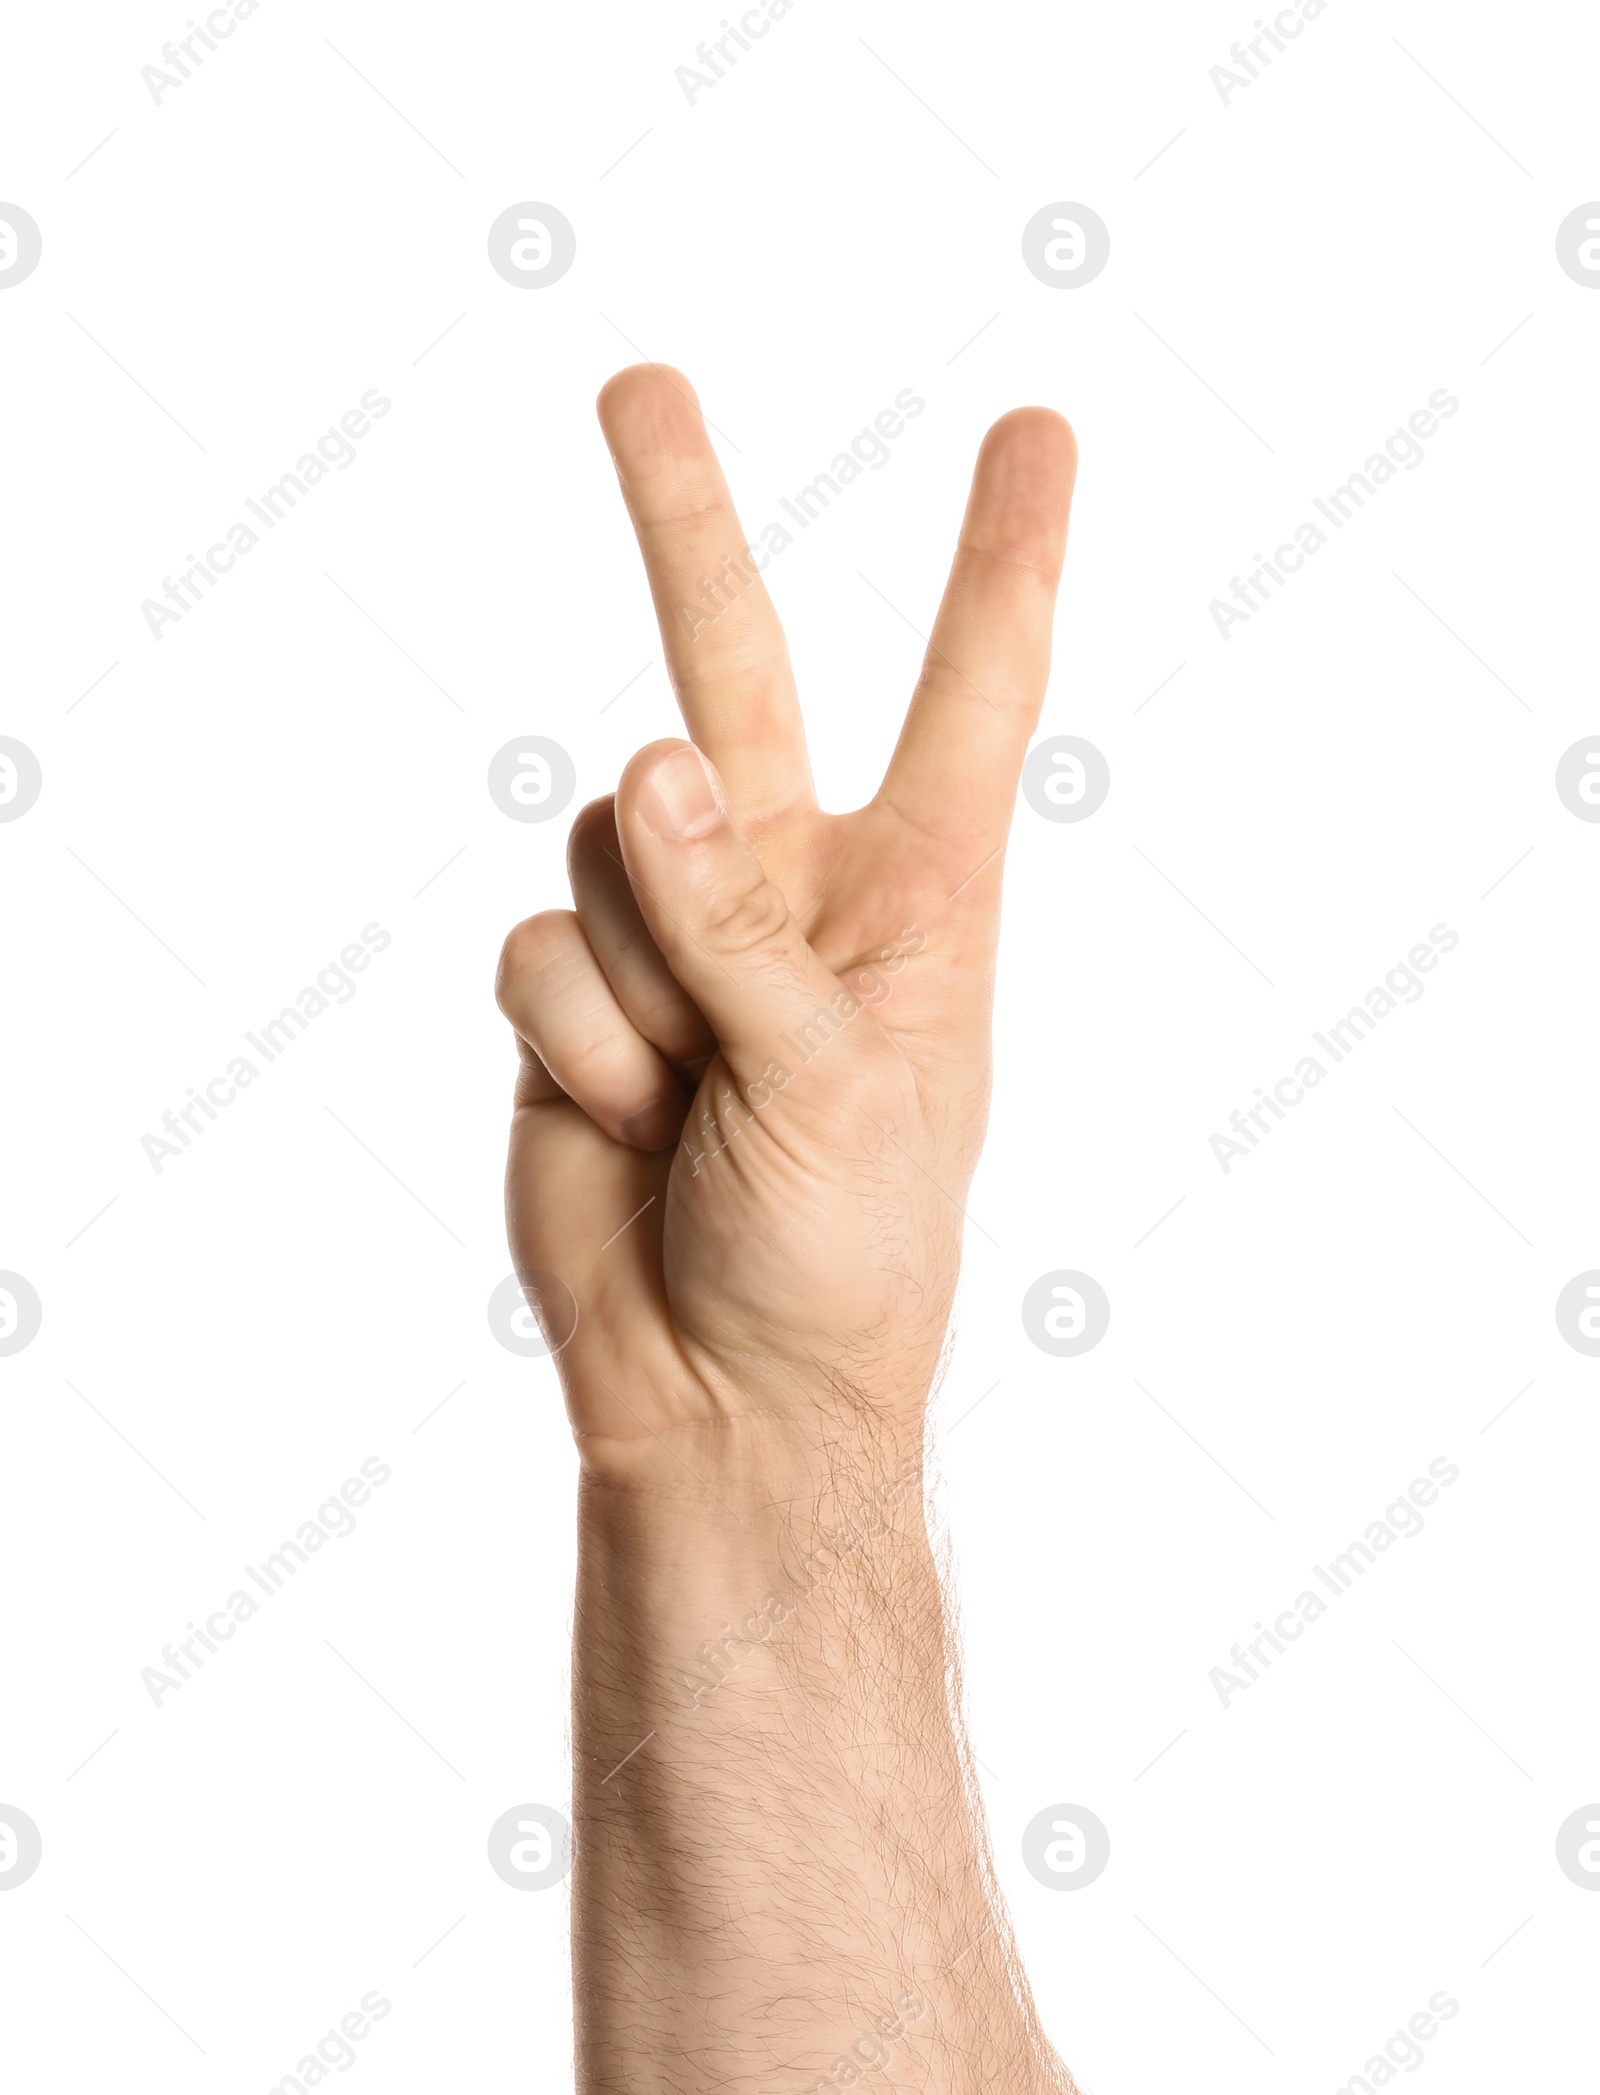 Photo of Young man showing victory gesture on white background